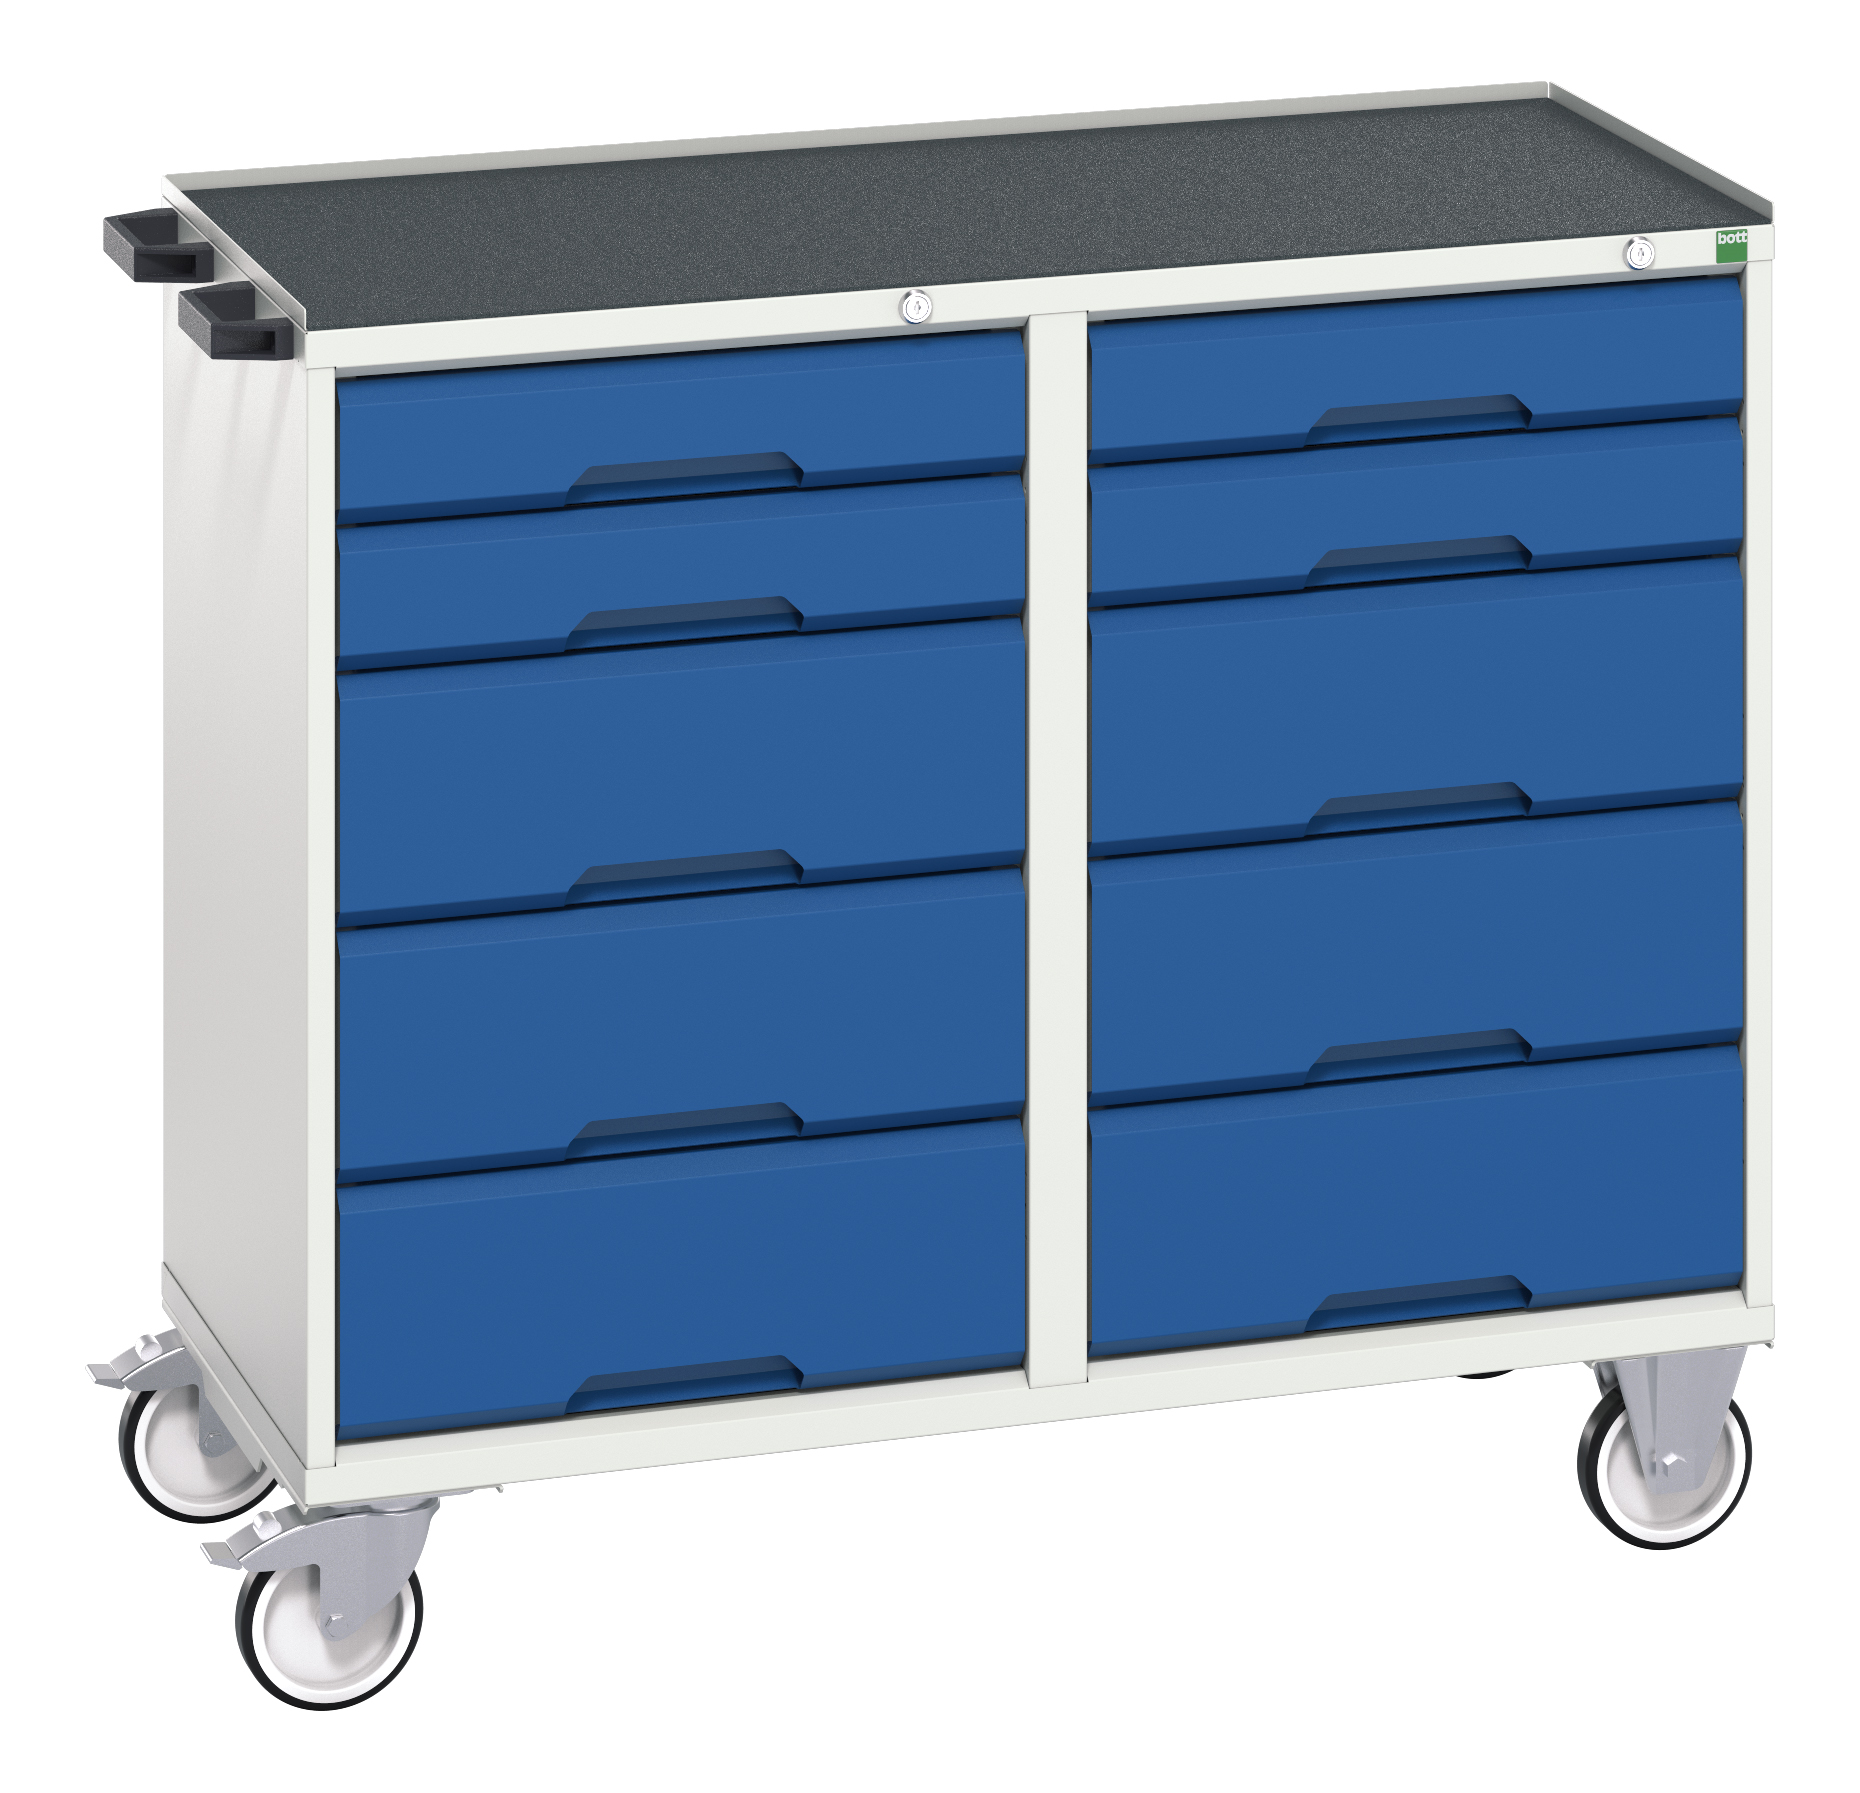 Bott Verso Maintenance Trolley With 10 Drawers & Top Tray With Mat - 16927102.11